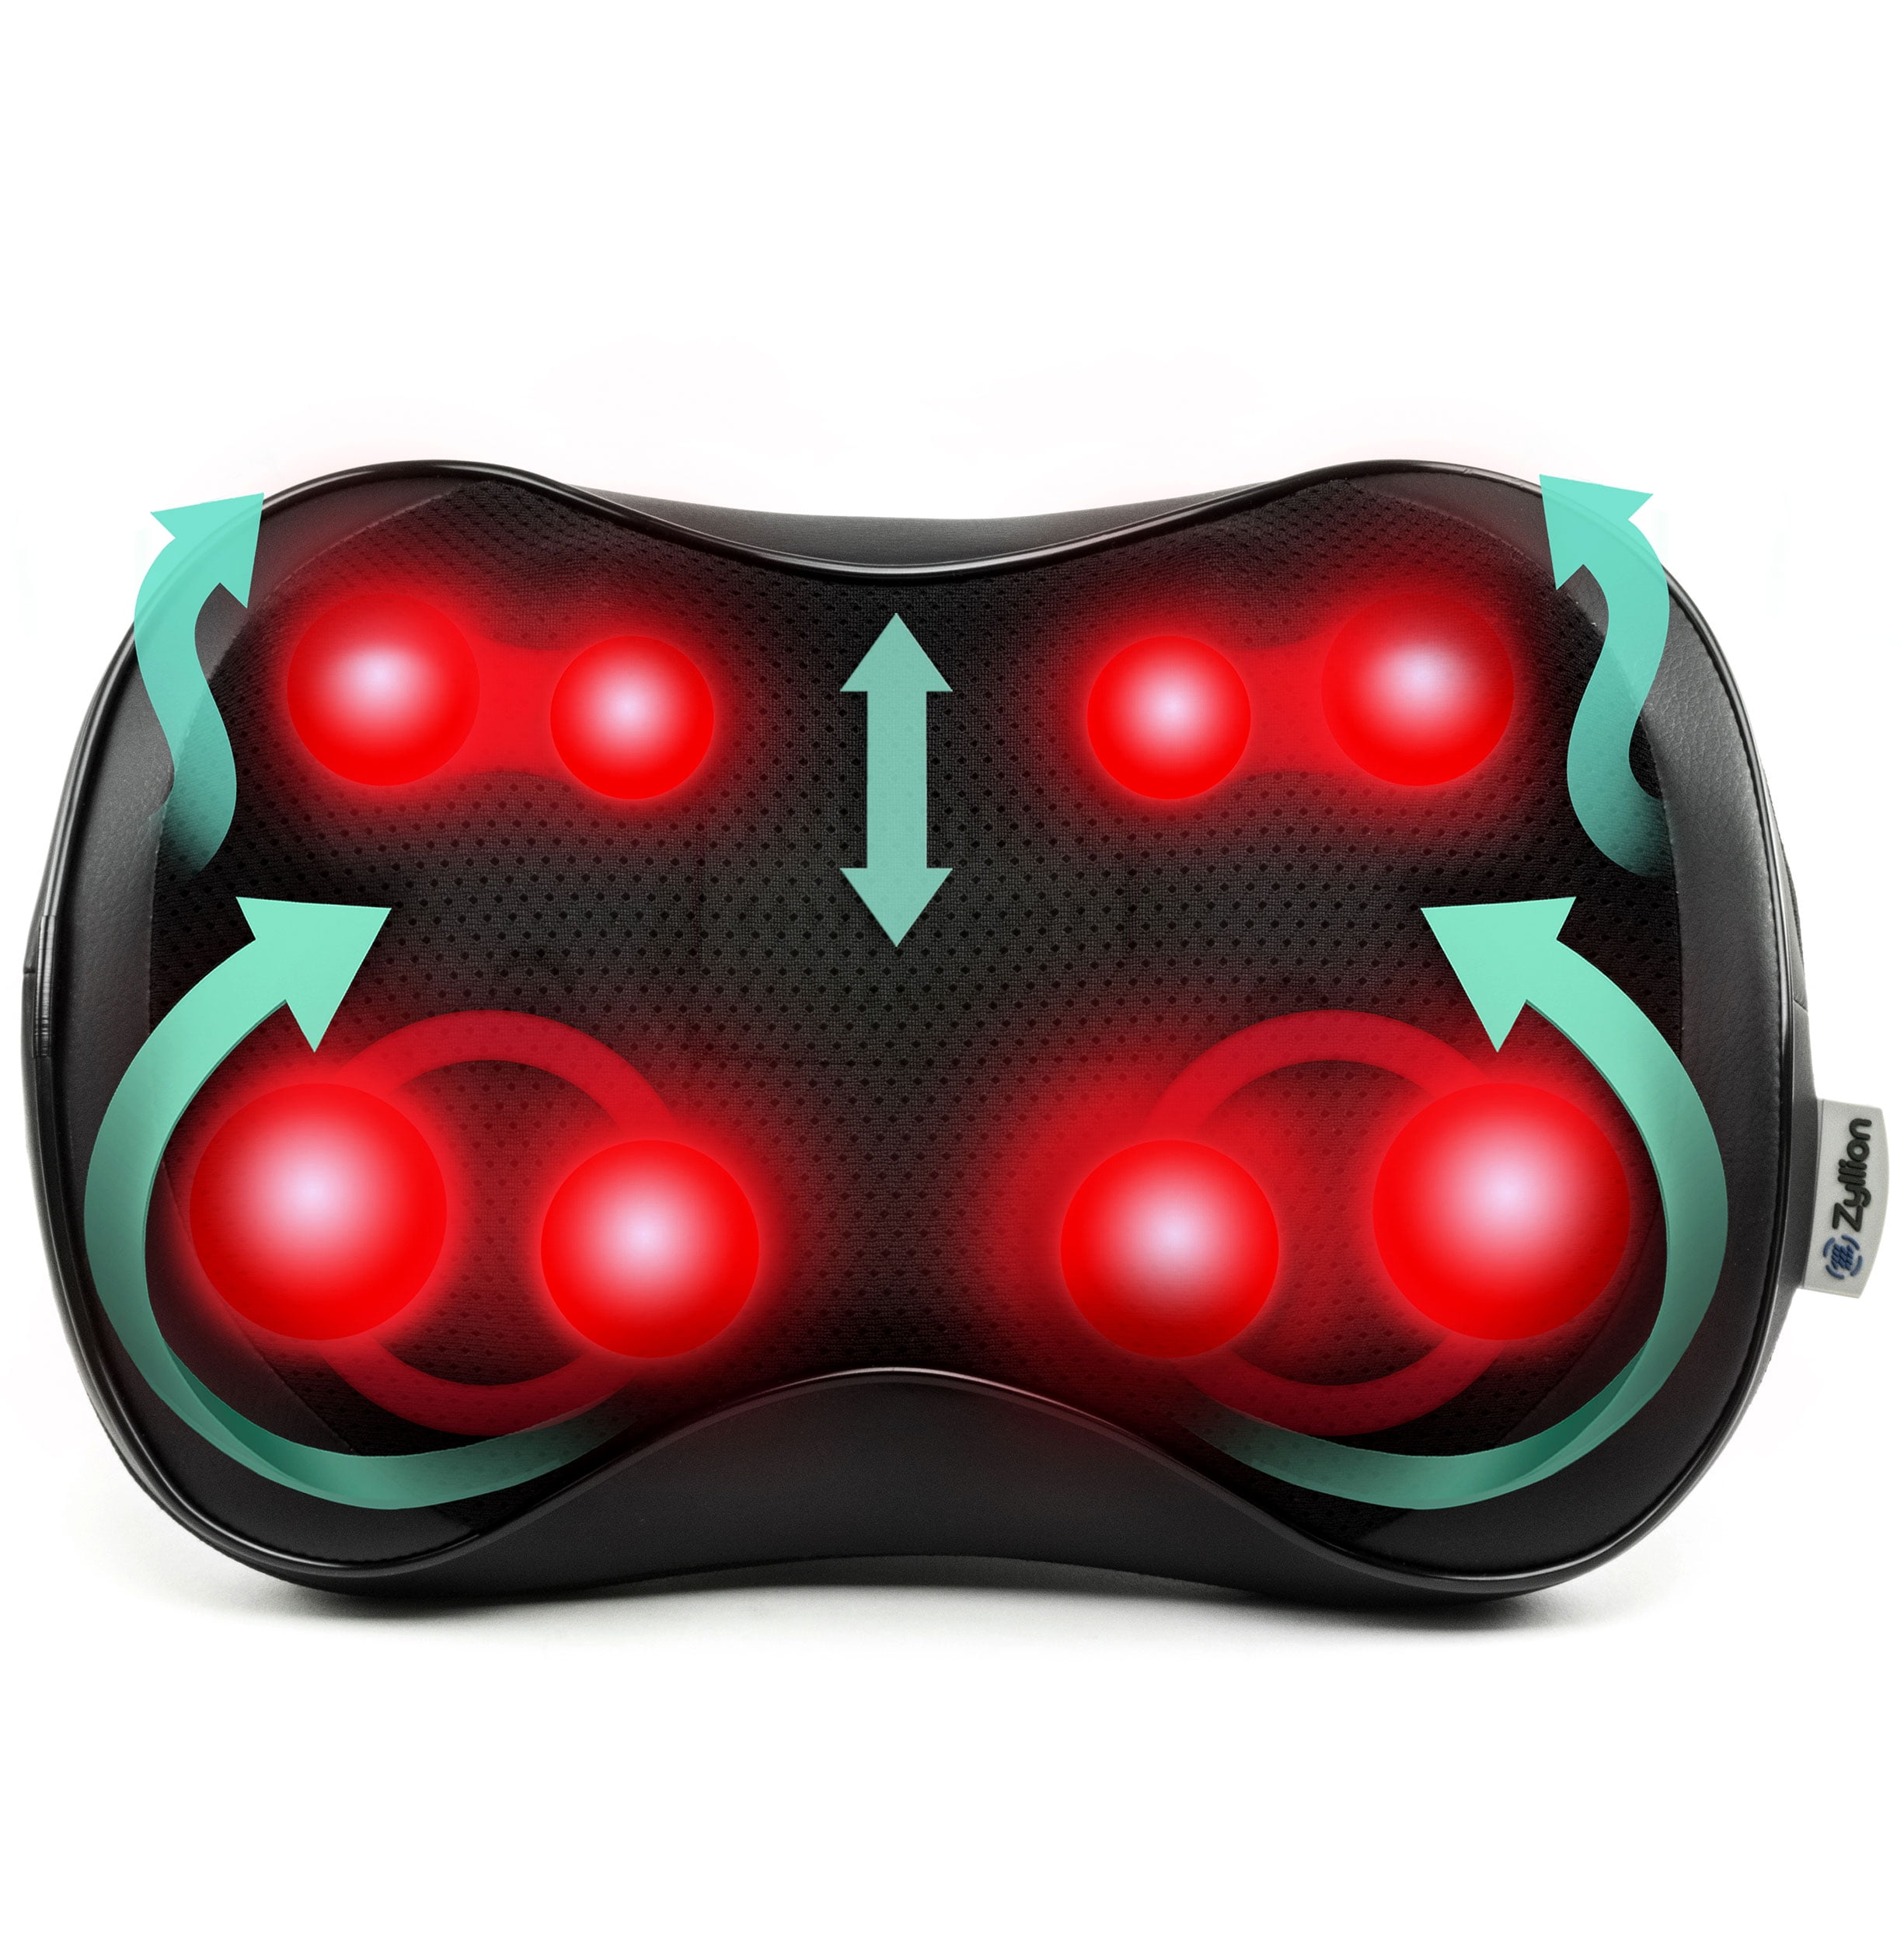 Zyllion Shiatsu Back, Neck, Foot Massagers from $32 in today's  Gold  Box